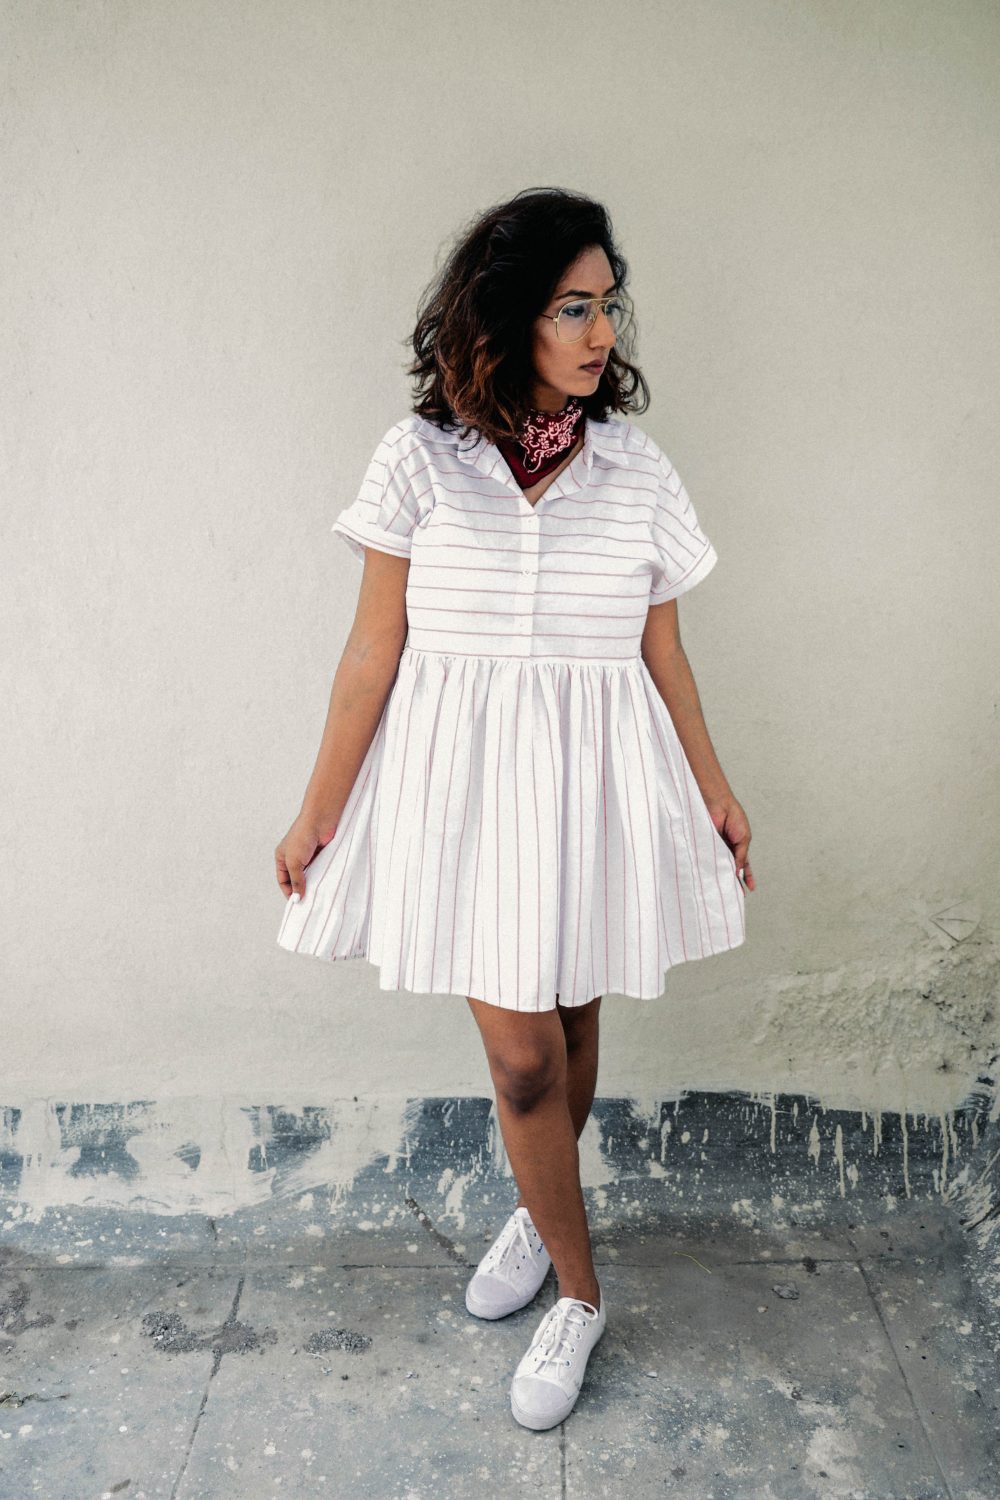 Lookbook ; Striped ; Dress ; Clear Aviators ; Outfit ; fashion photography ; Brown Lips ; New Chic ; ootd ; sneakers ; white ; street style ; neckerchief; red ; bandana ; strong ; Dark ; summer fashion ; summer outfit ; spring ; summer 17 ; Hyderabad ; Editorial ; Naznin ; Naznin Suhaer ; dusky; model ; indian blogger ; hyderabad fashion bloggers ; hyderabad bloggers ; hyderabad fashion blogger ; I Dress for the Applause ; 